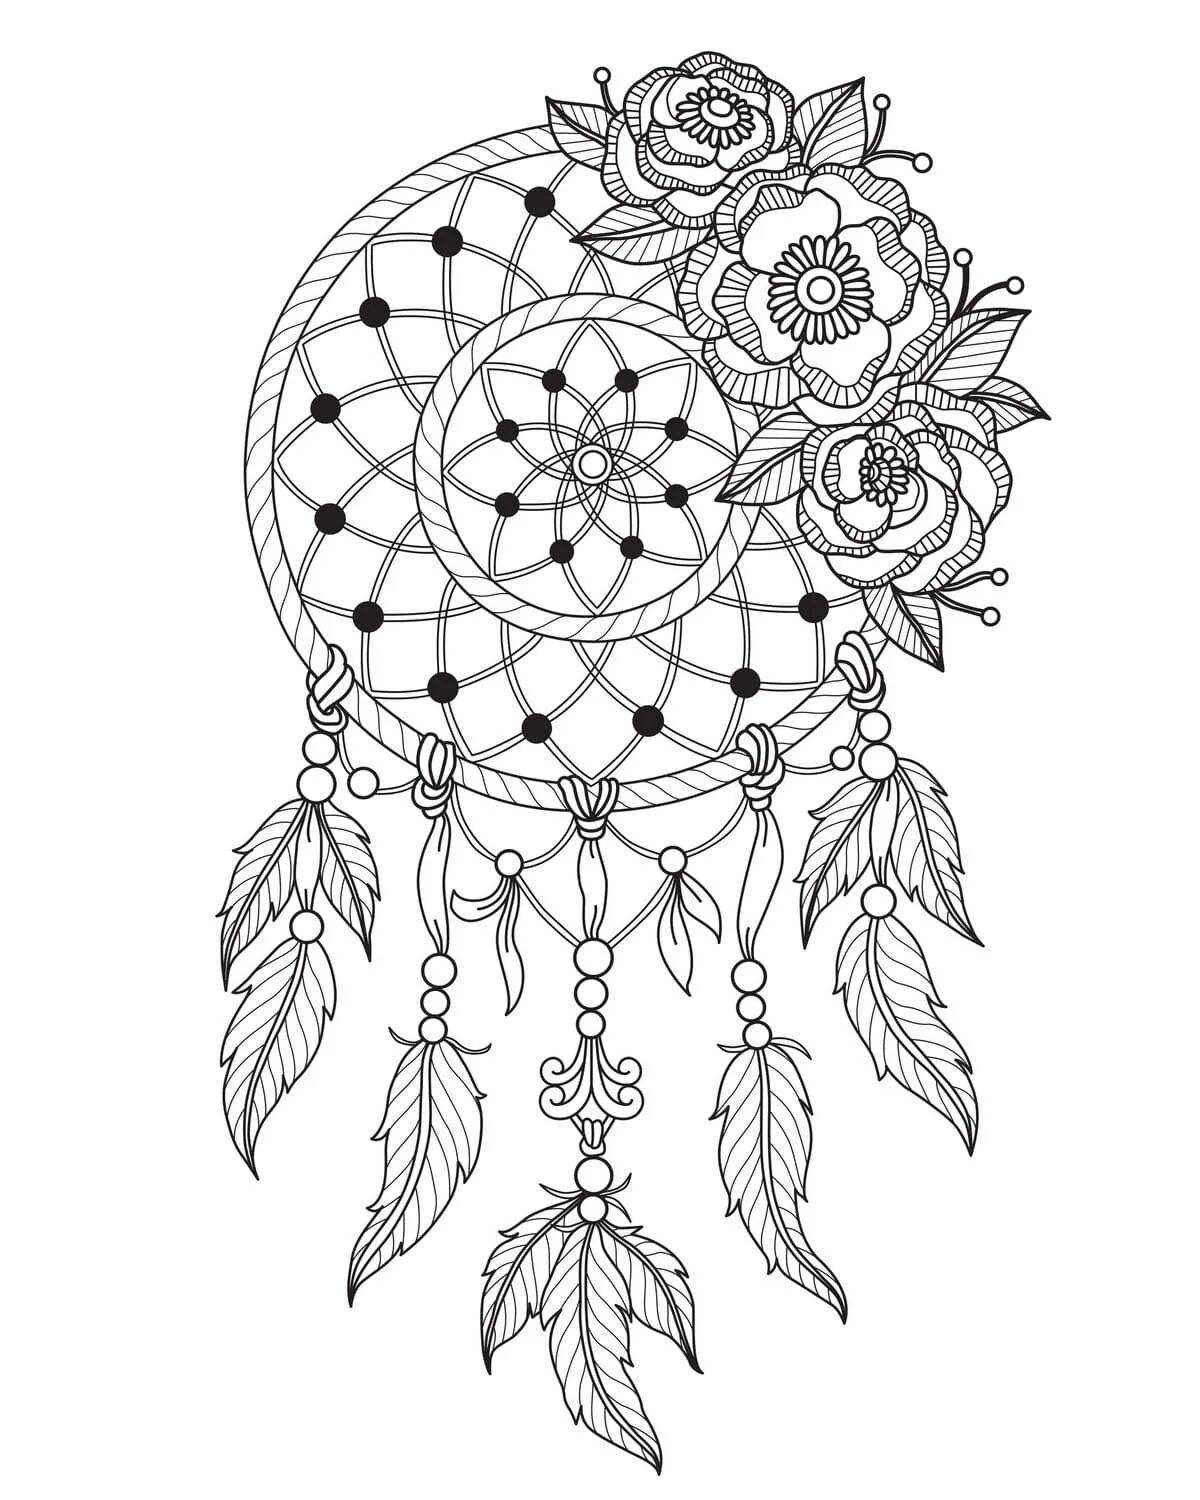 Comforting coloring book antistress dreamcatcher